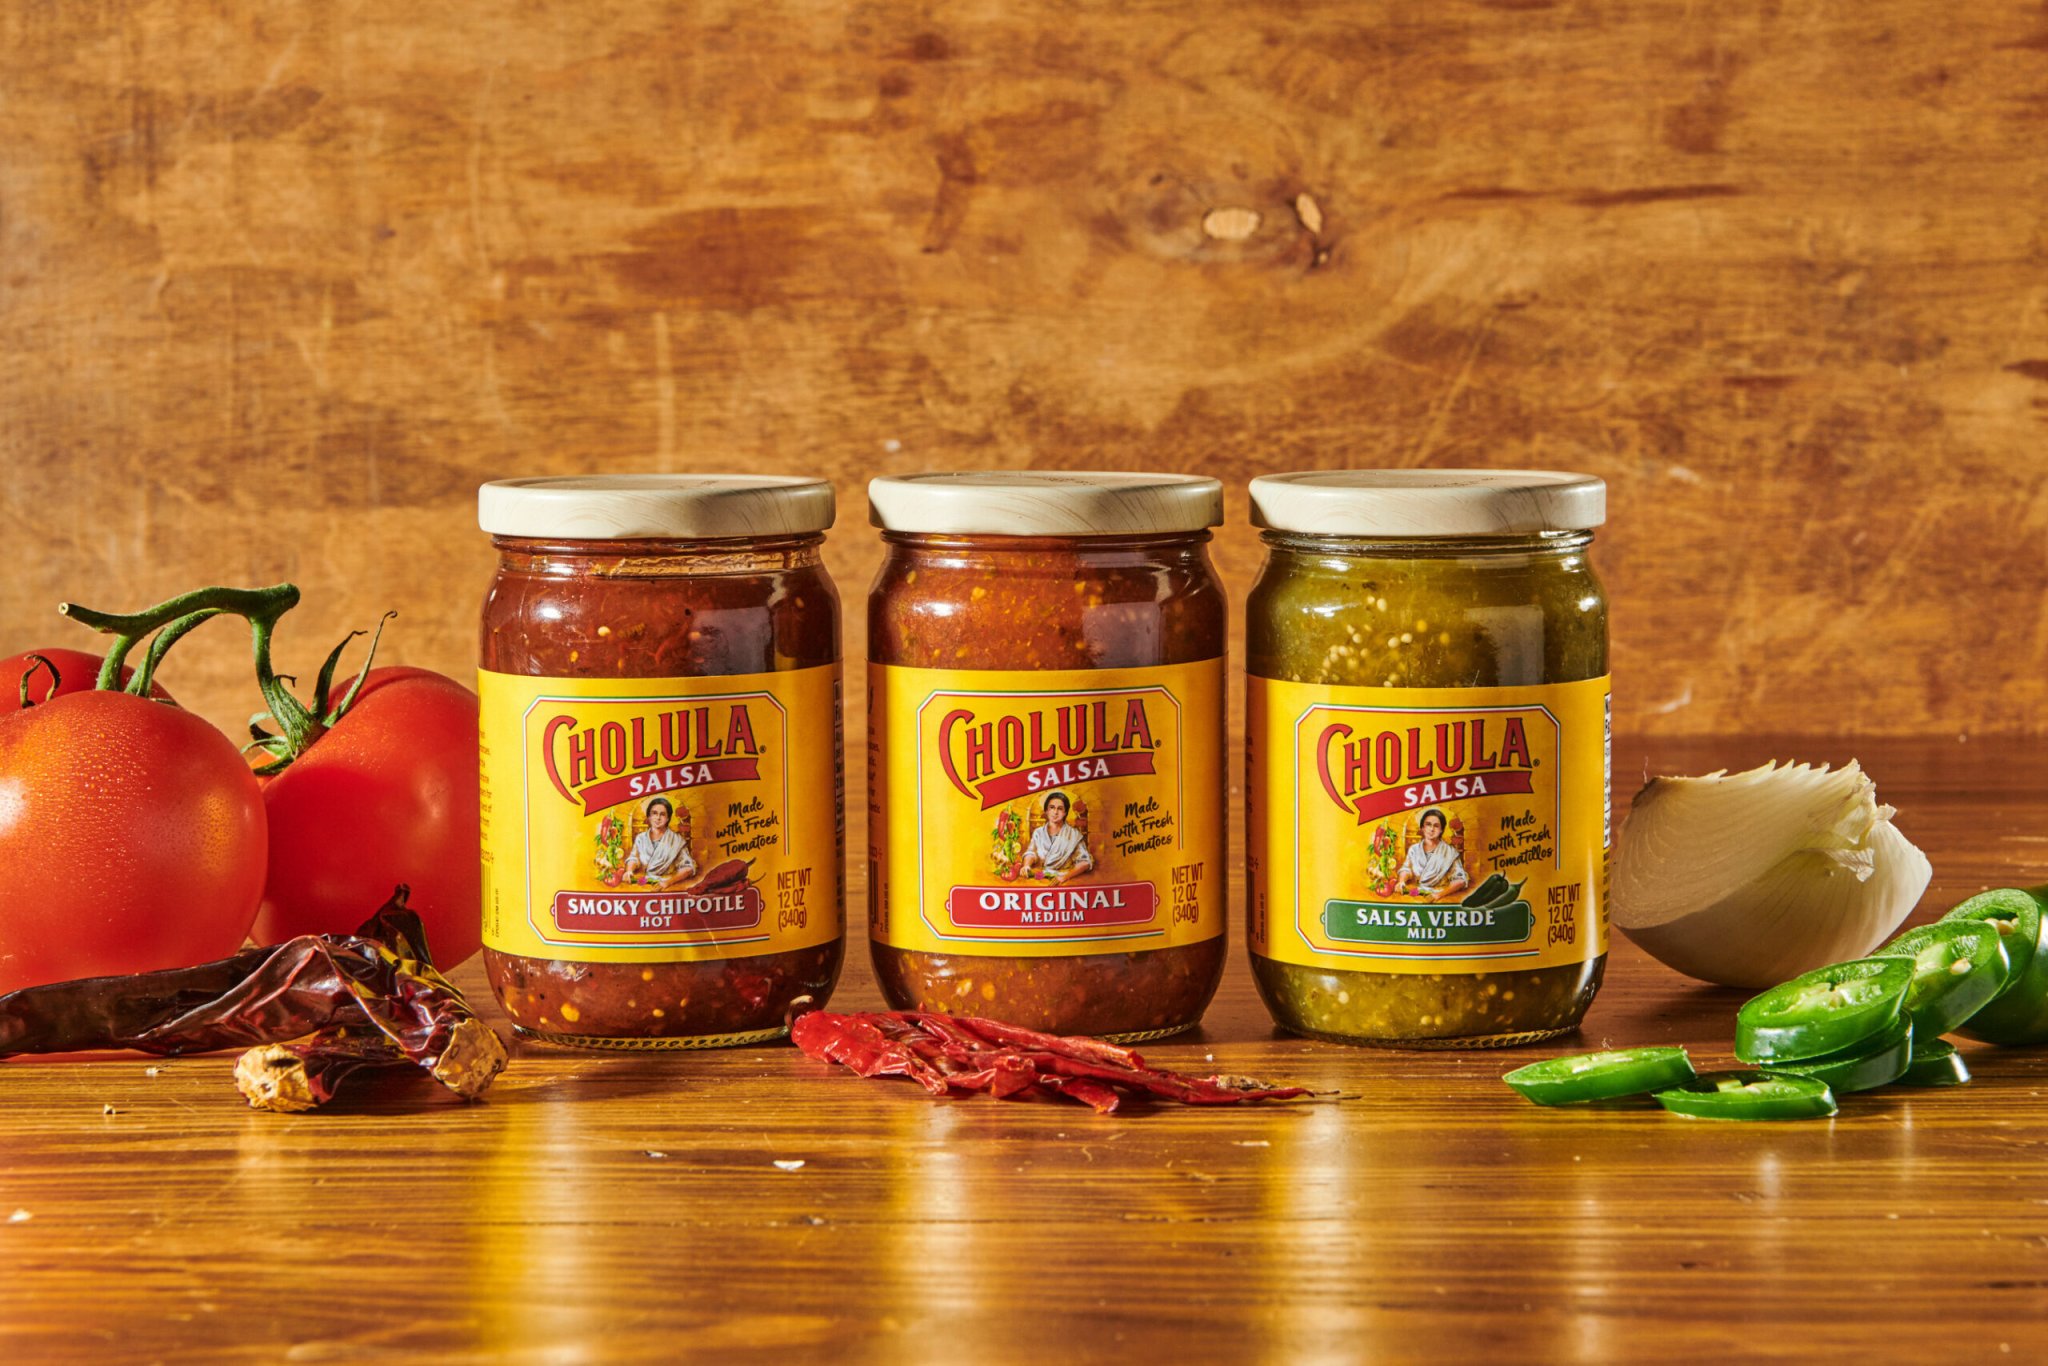 Cholula Expands with New Salsa and Seasonings ‘Gen Z Prefers Mexican Food over Italian’